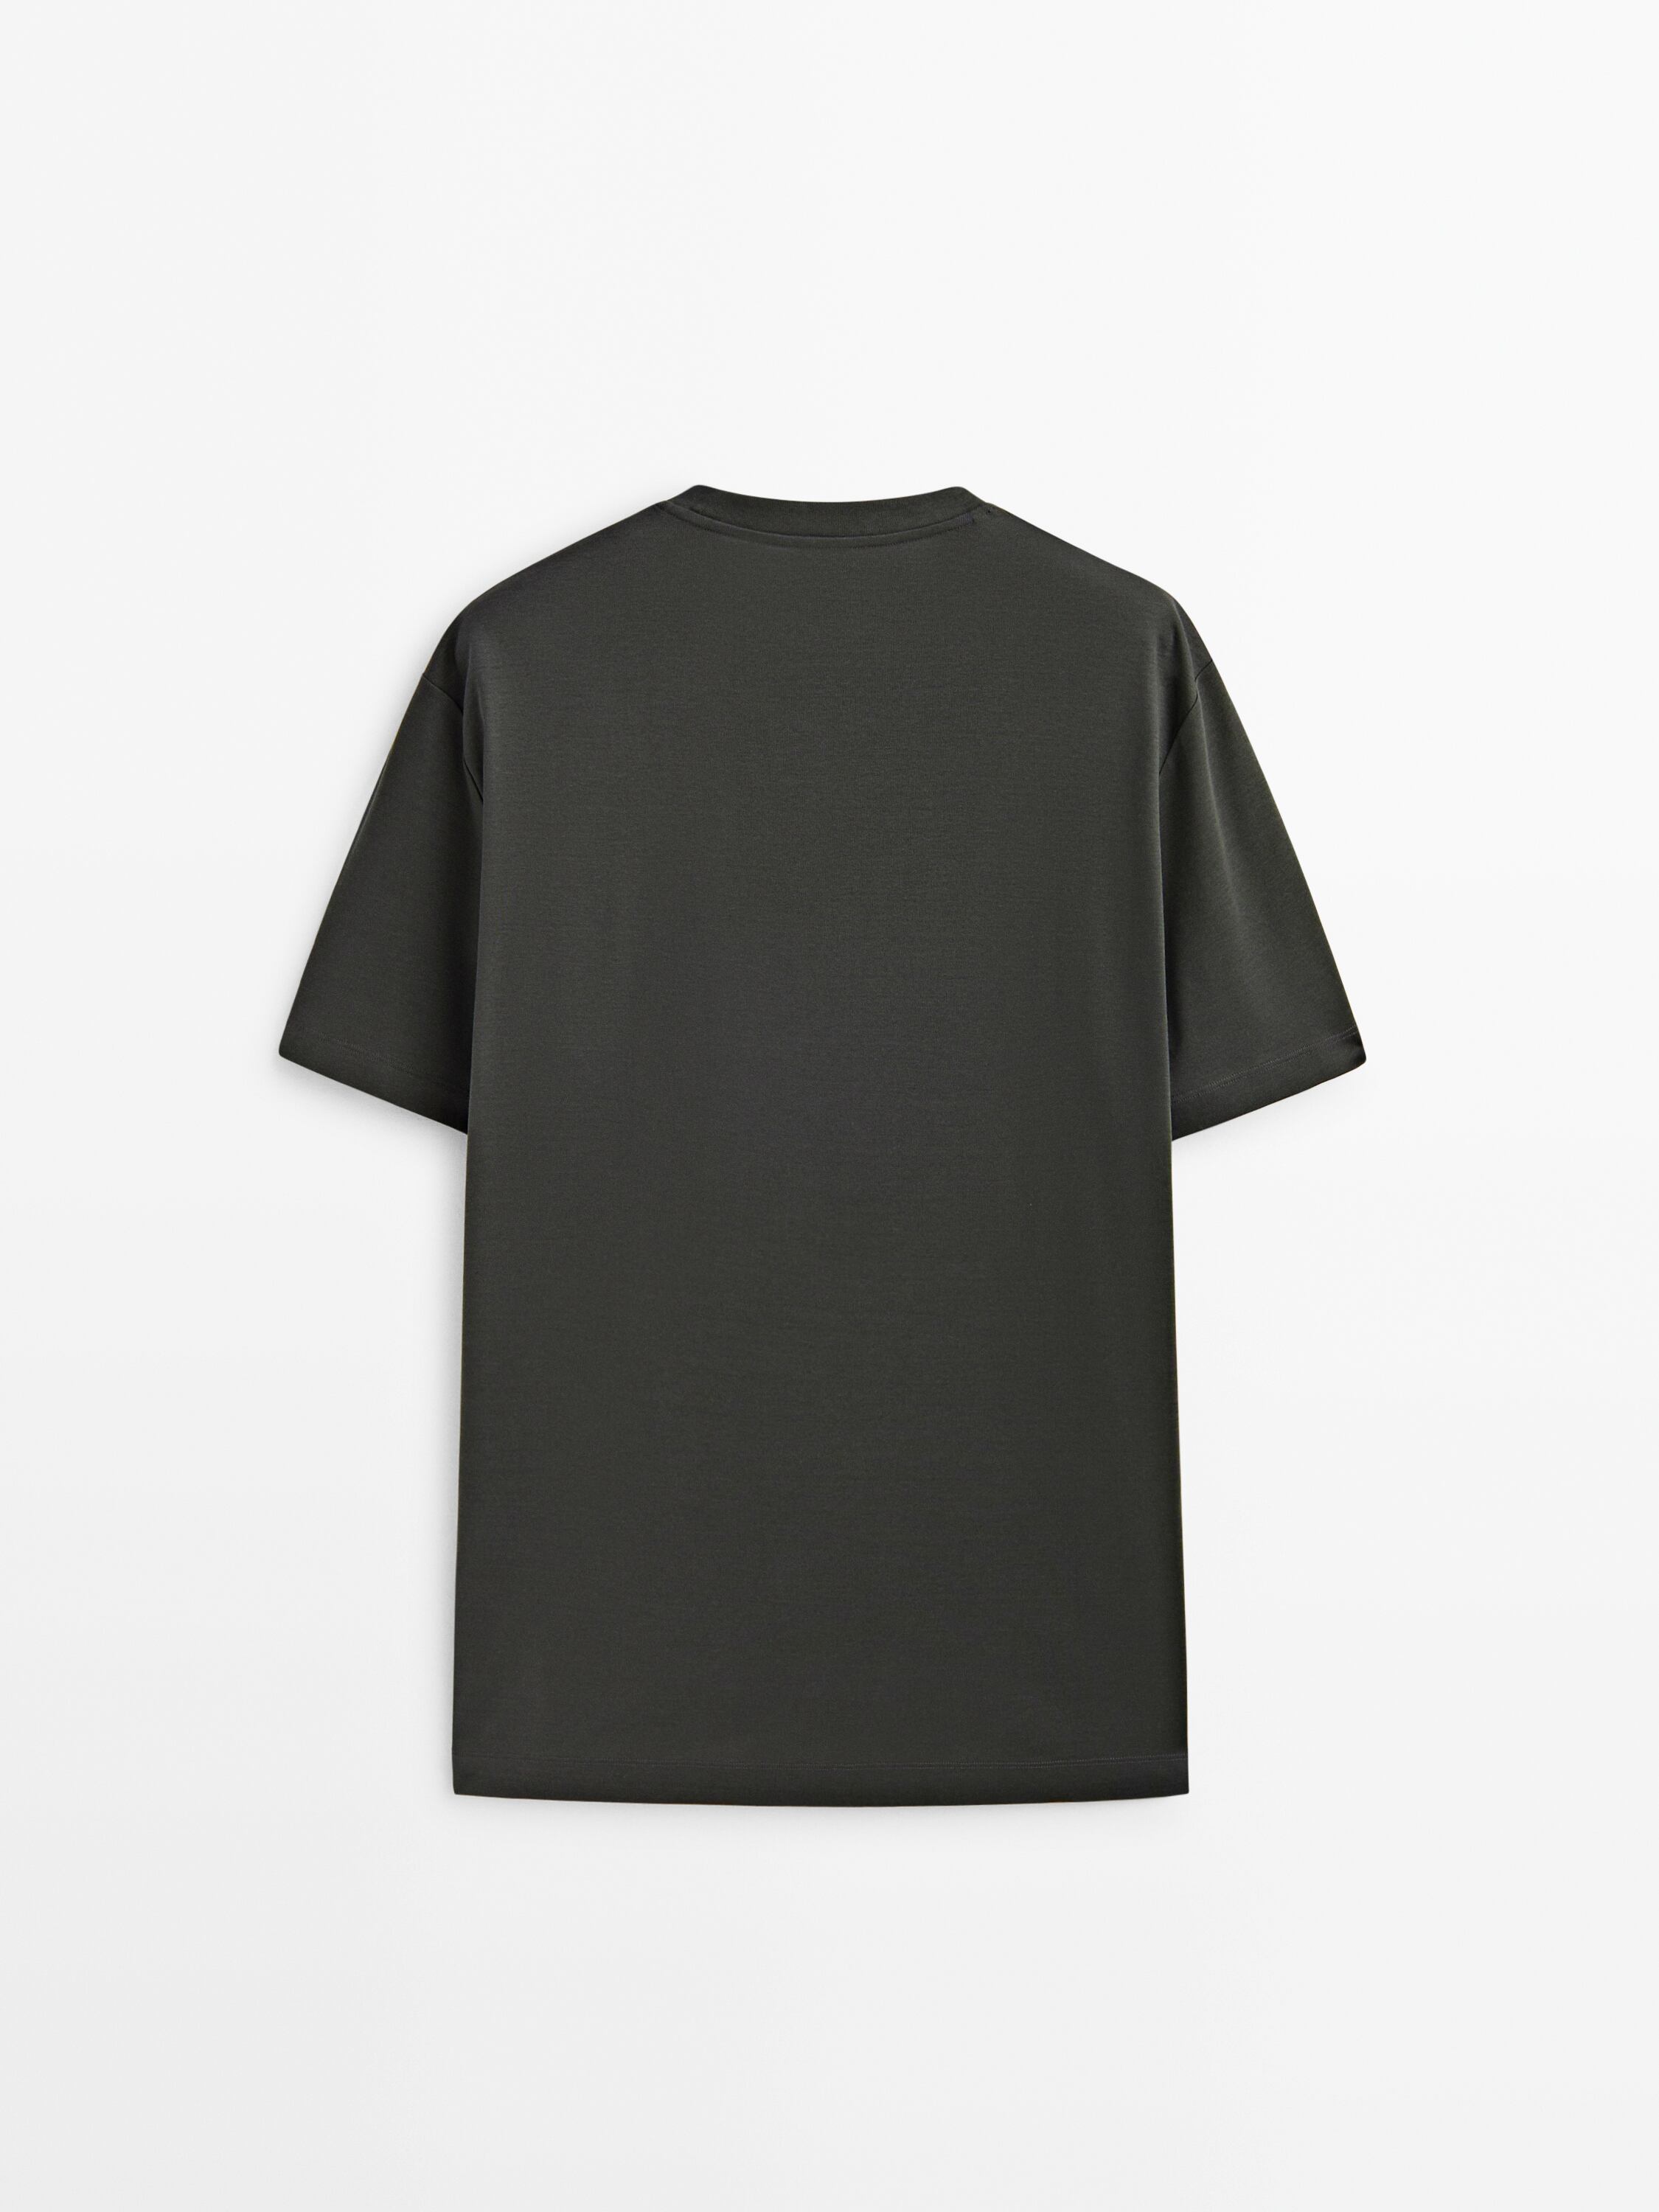 Relaxed fit short sleeve cotton T-shirt - Studio